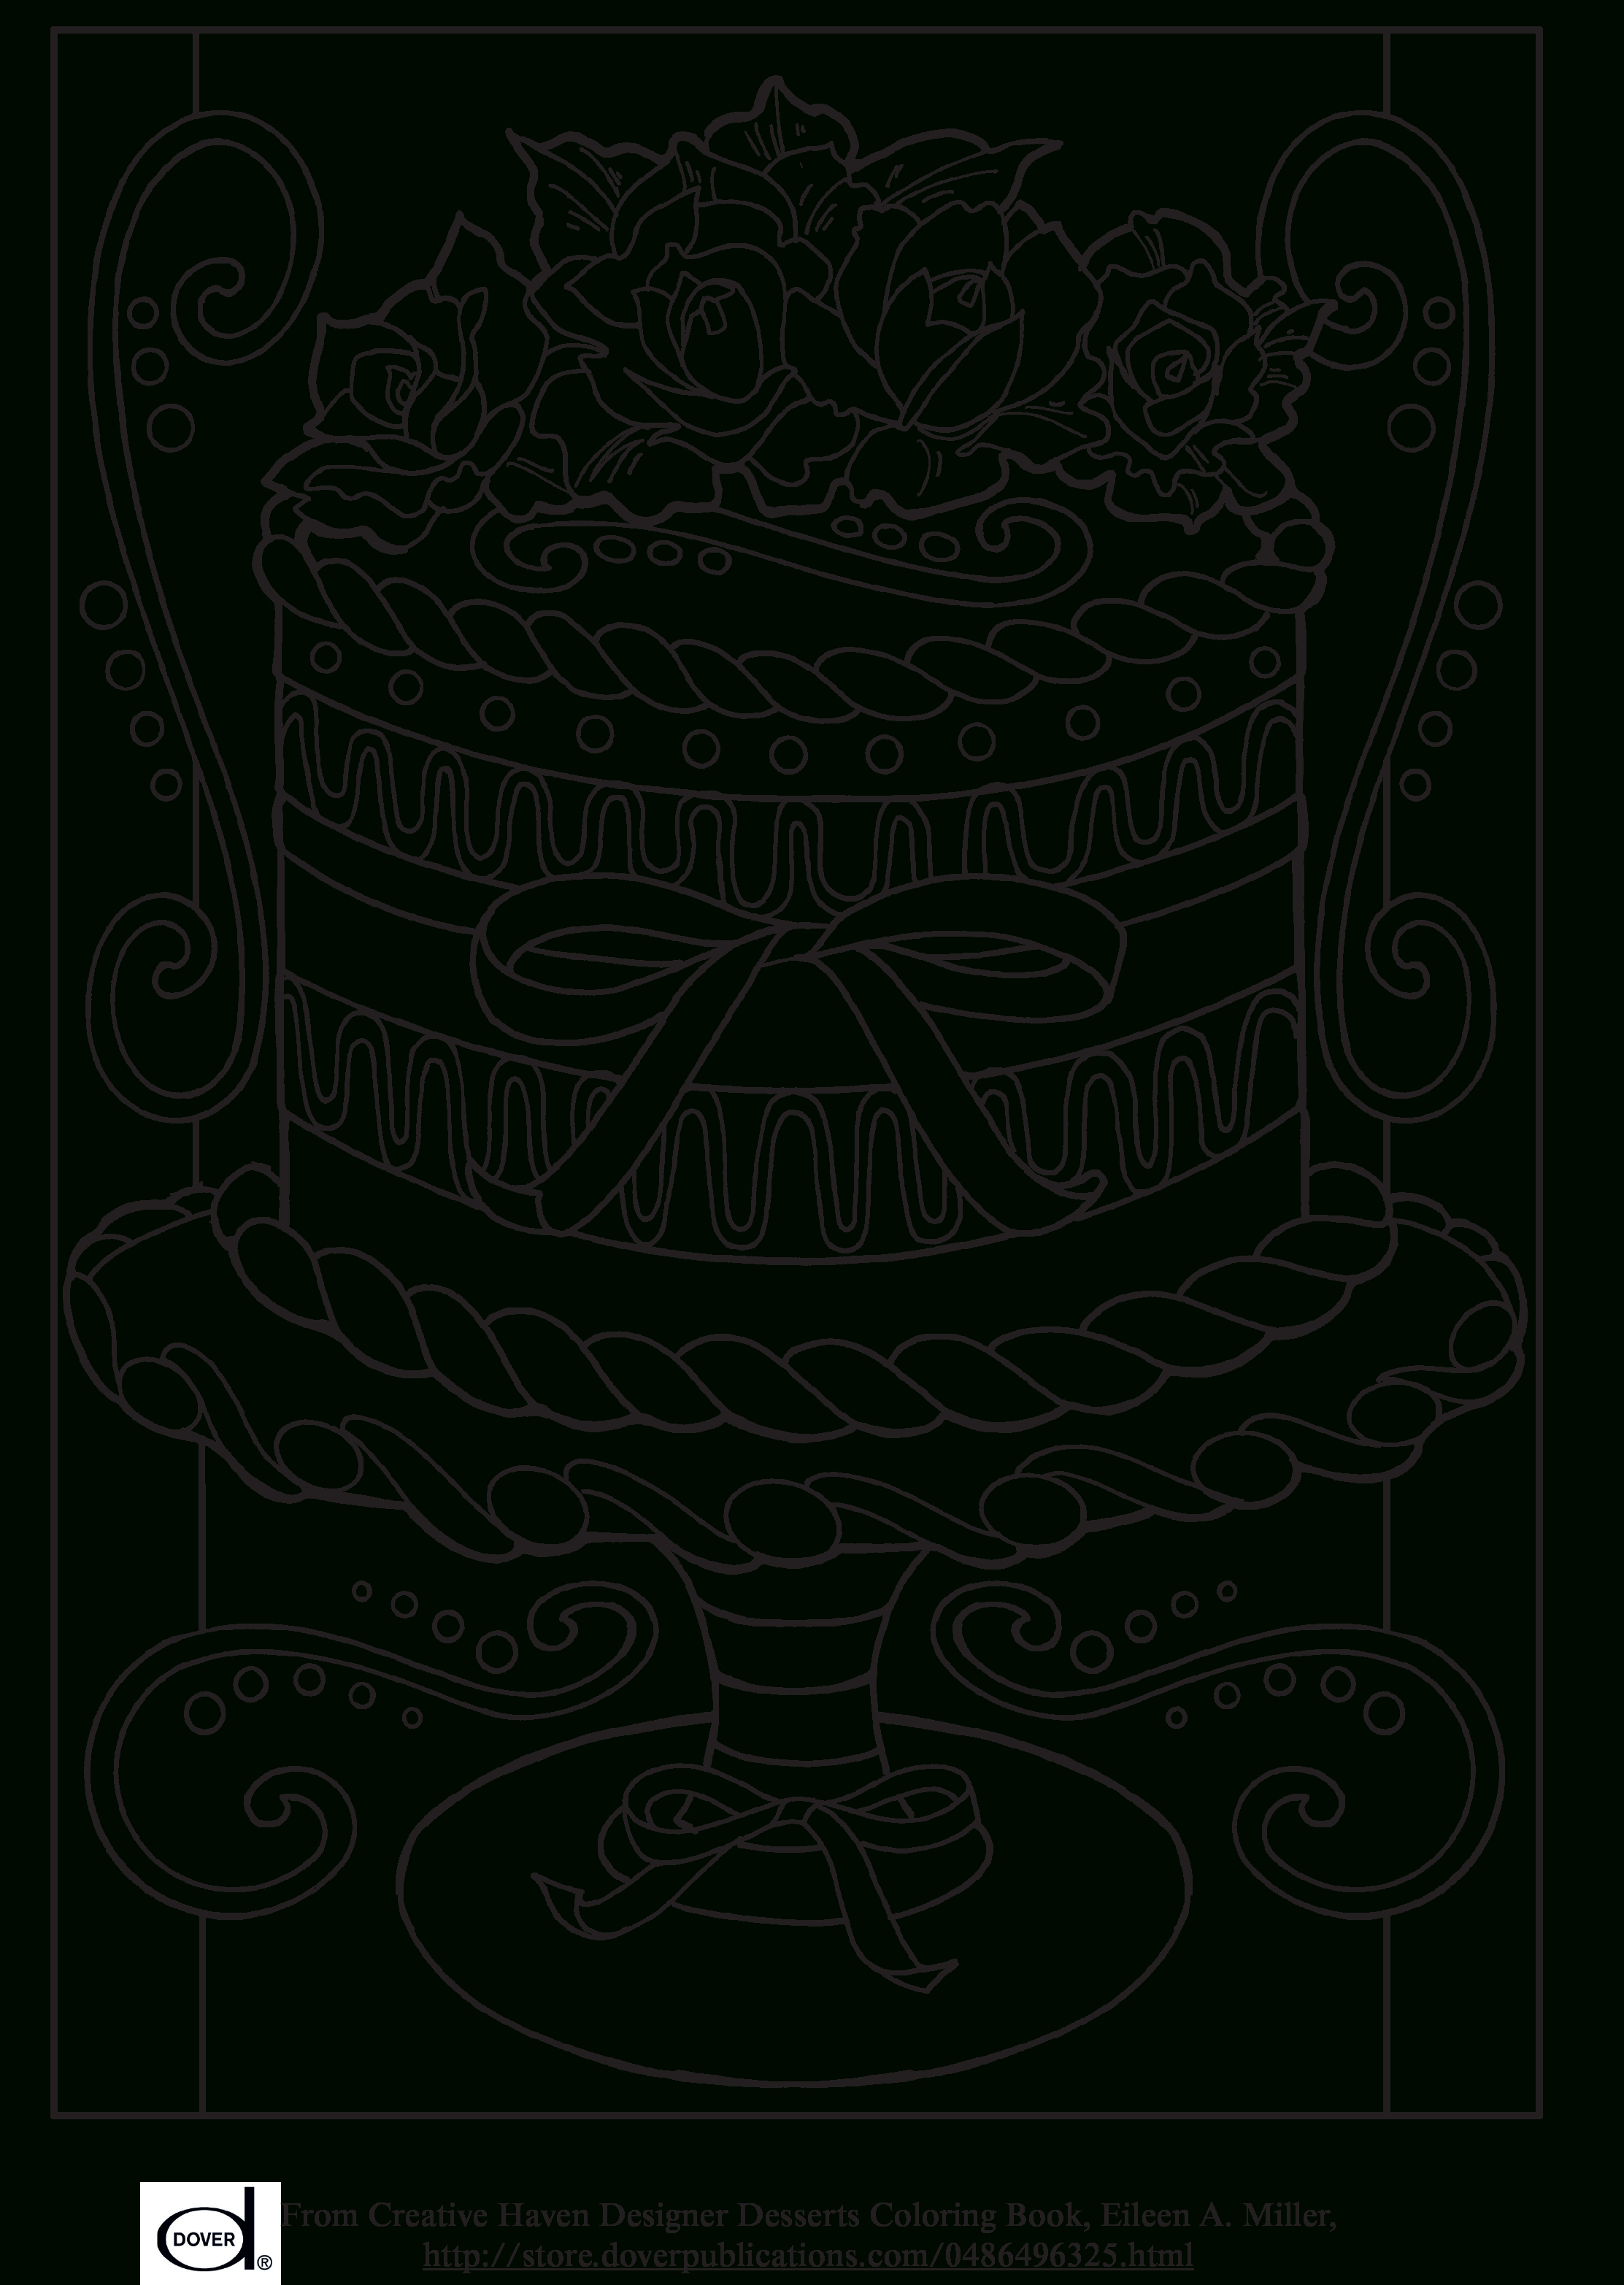 Free Printable Adult Coloring Pages - Wedding Cake | Art: Coloring | Colouring Worksheets Printable